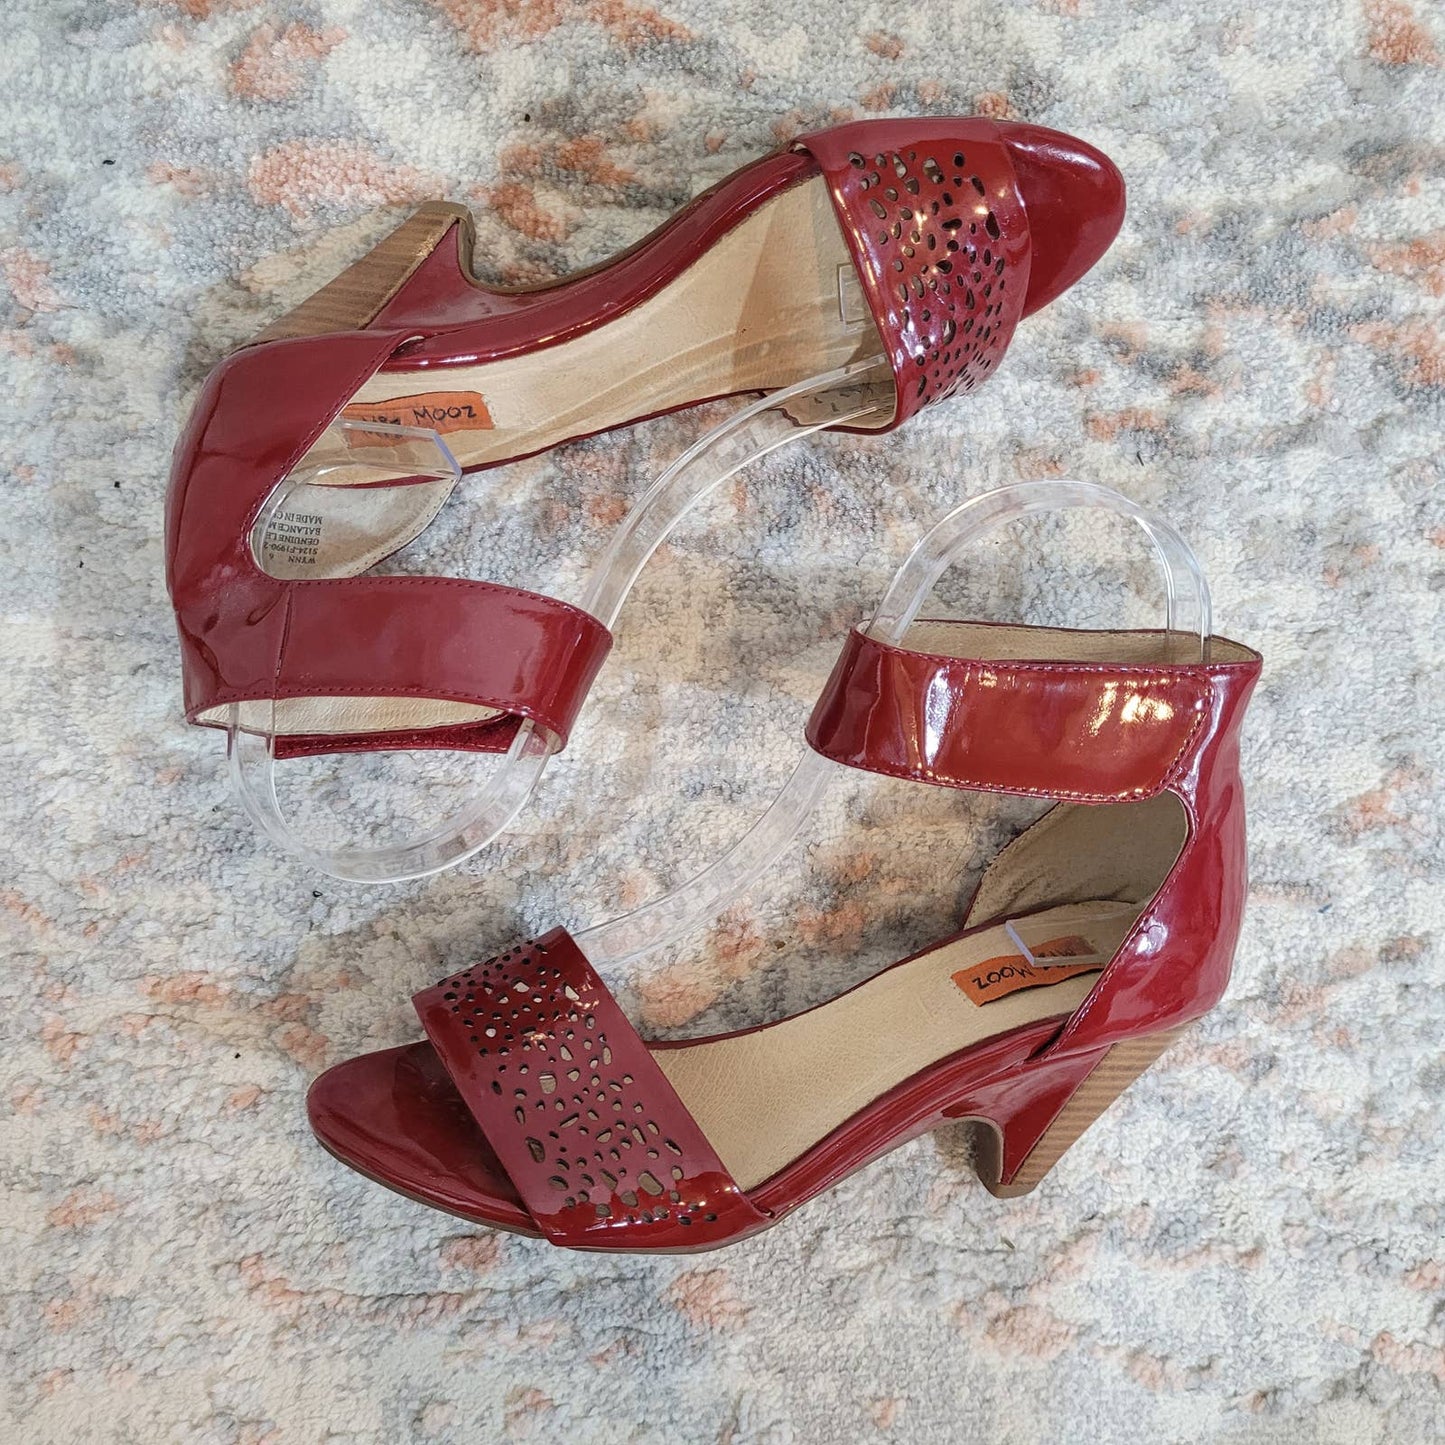 Miz Mooz Wynn Patent Leather Red Sandals with Real Leather Lining - Size 6